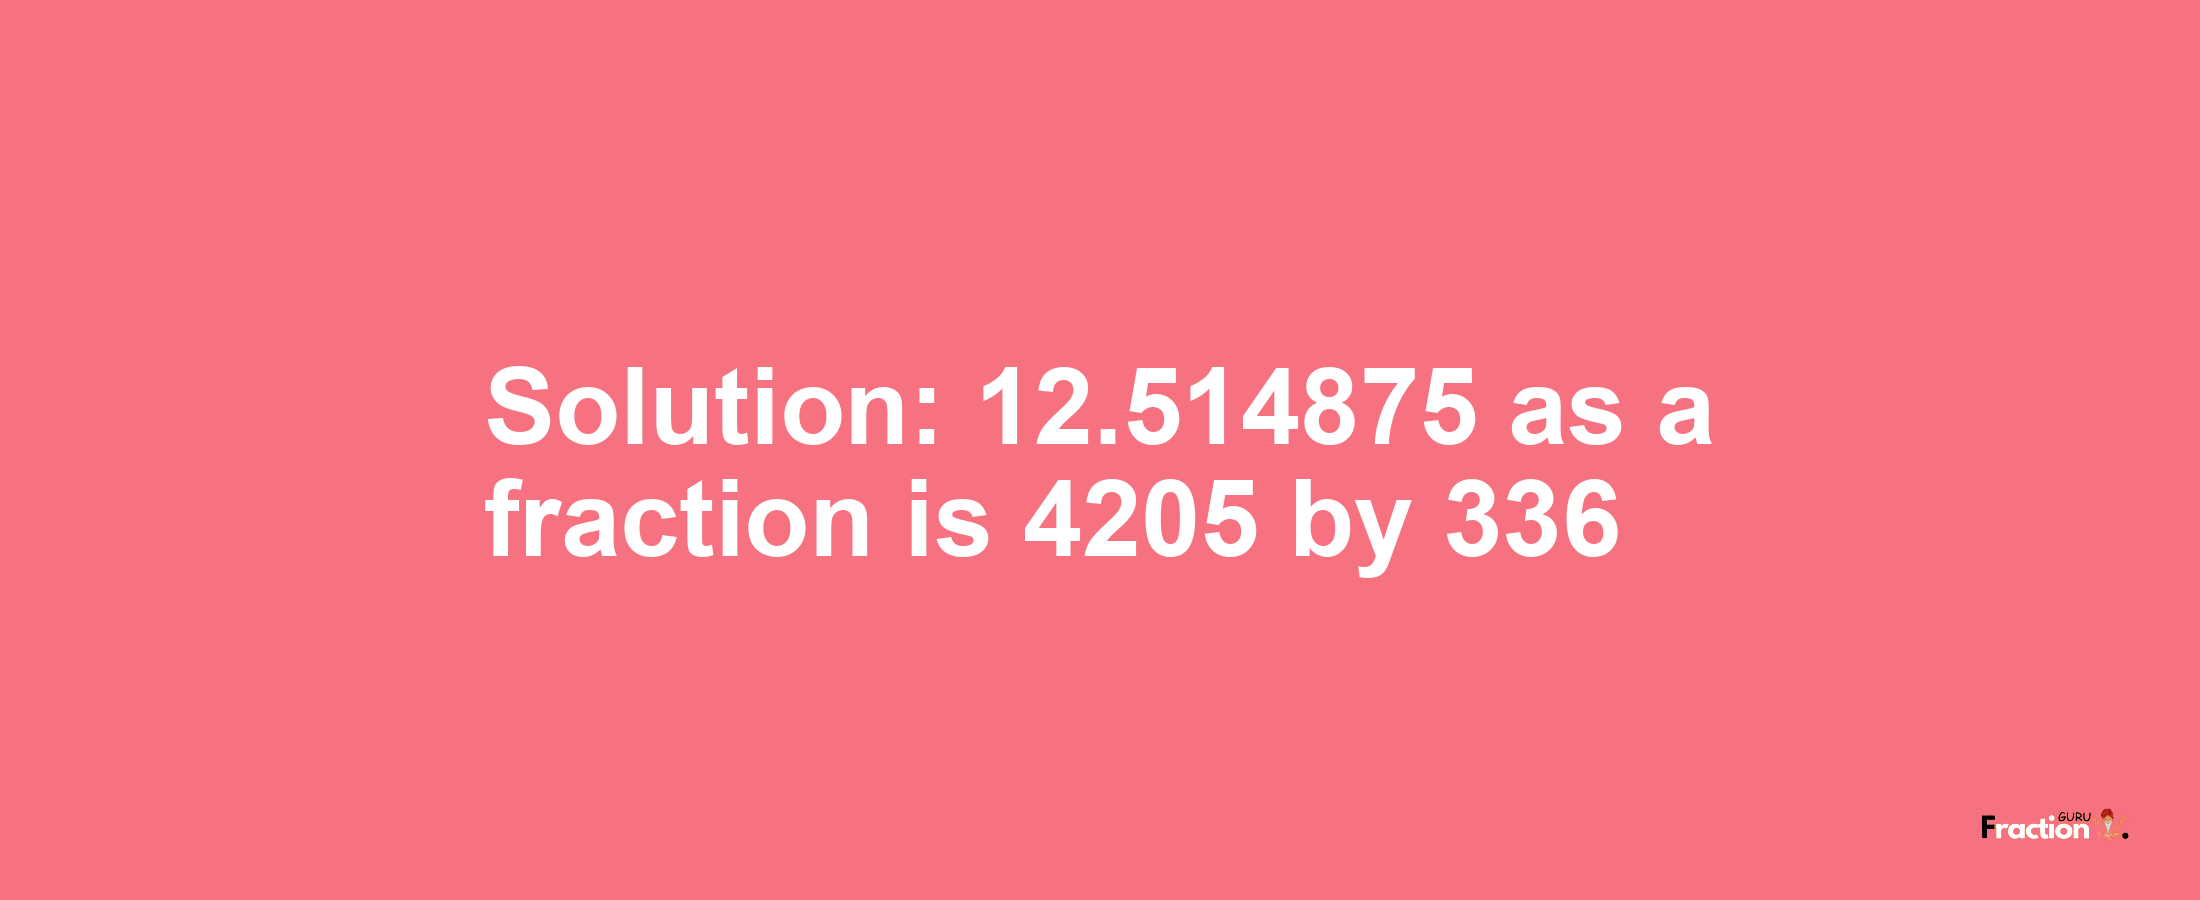 Solution:12.514875 as a fraction is 4205/336